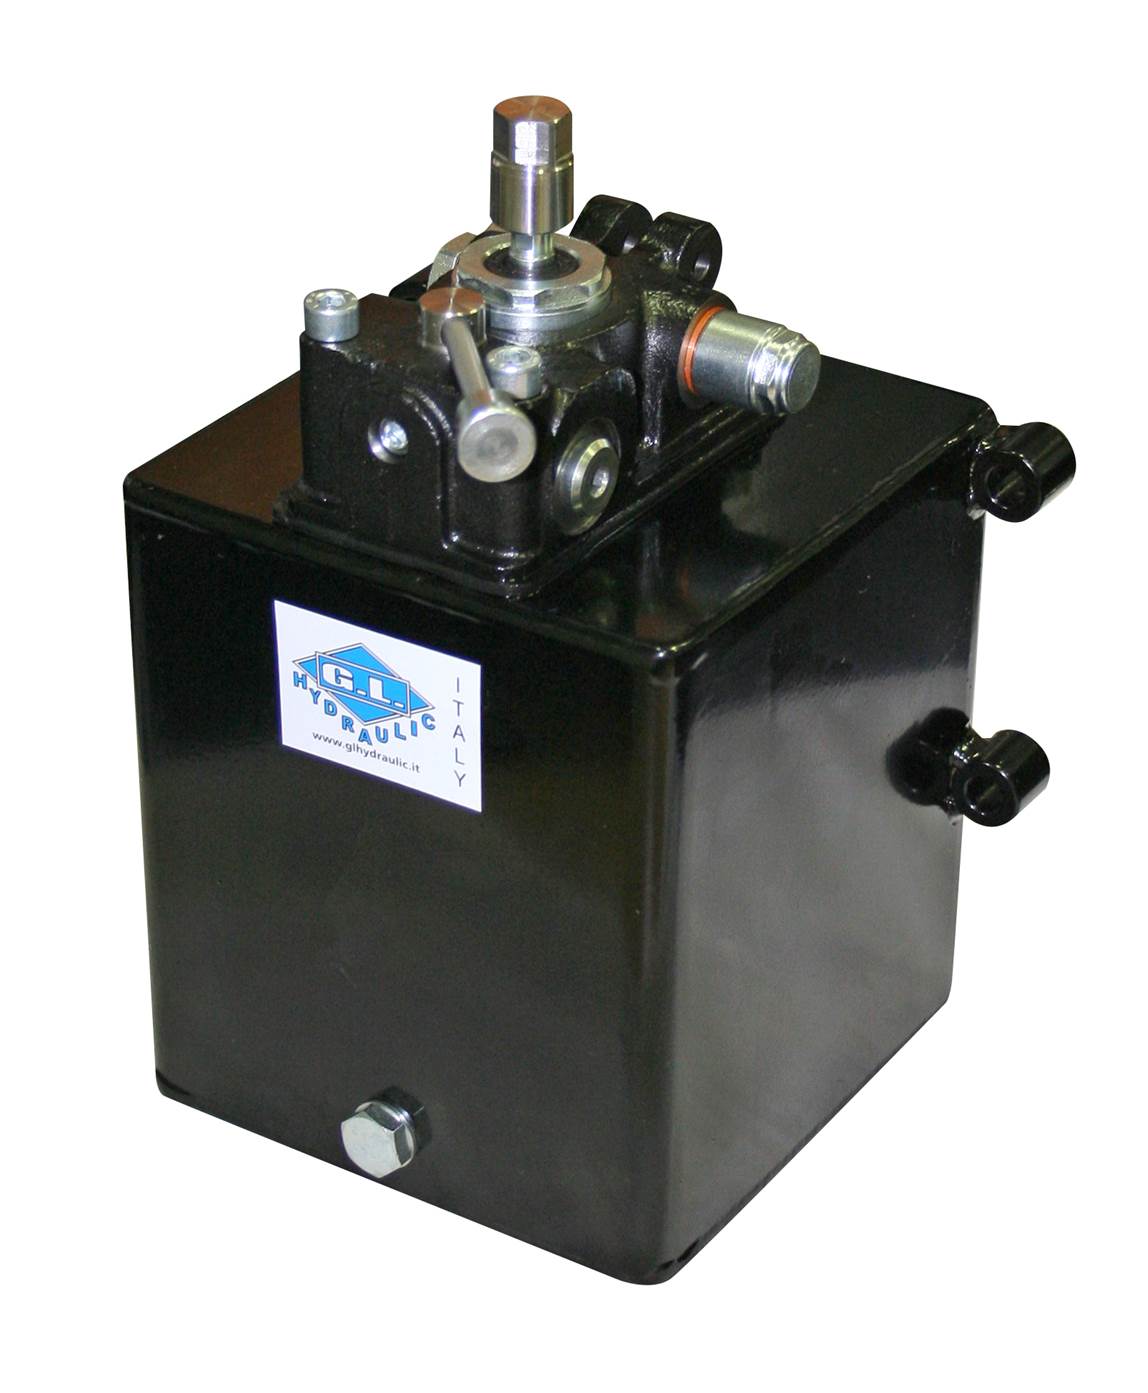 Zero Effort System for Double Acting Cylinder, 0.45C Gear Pump, 4 Litre Tank